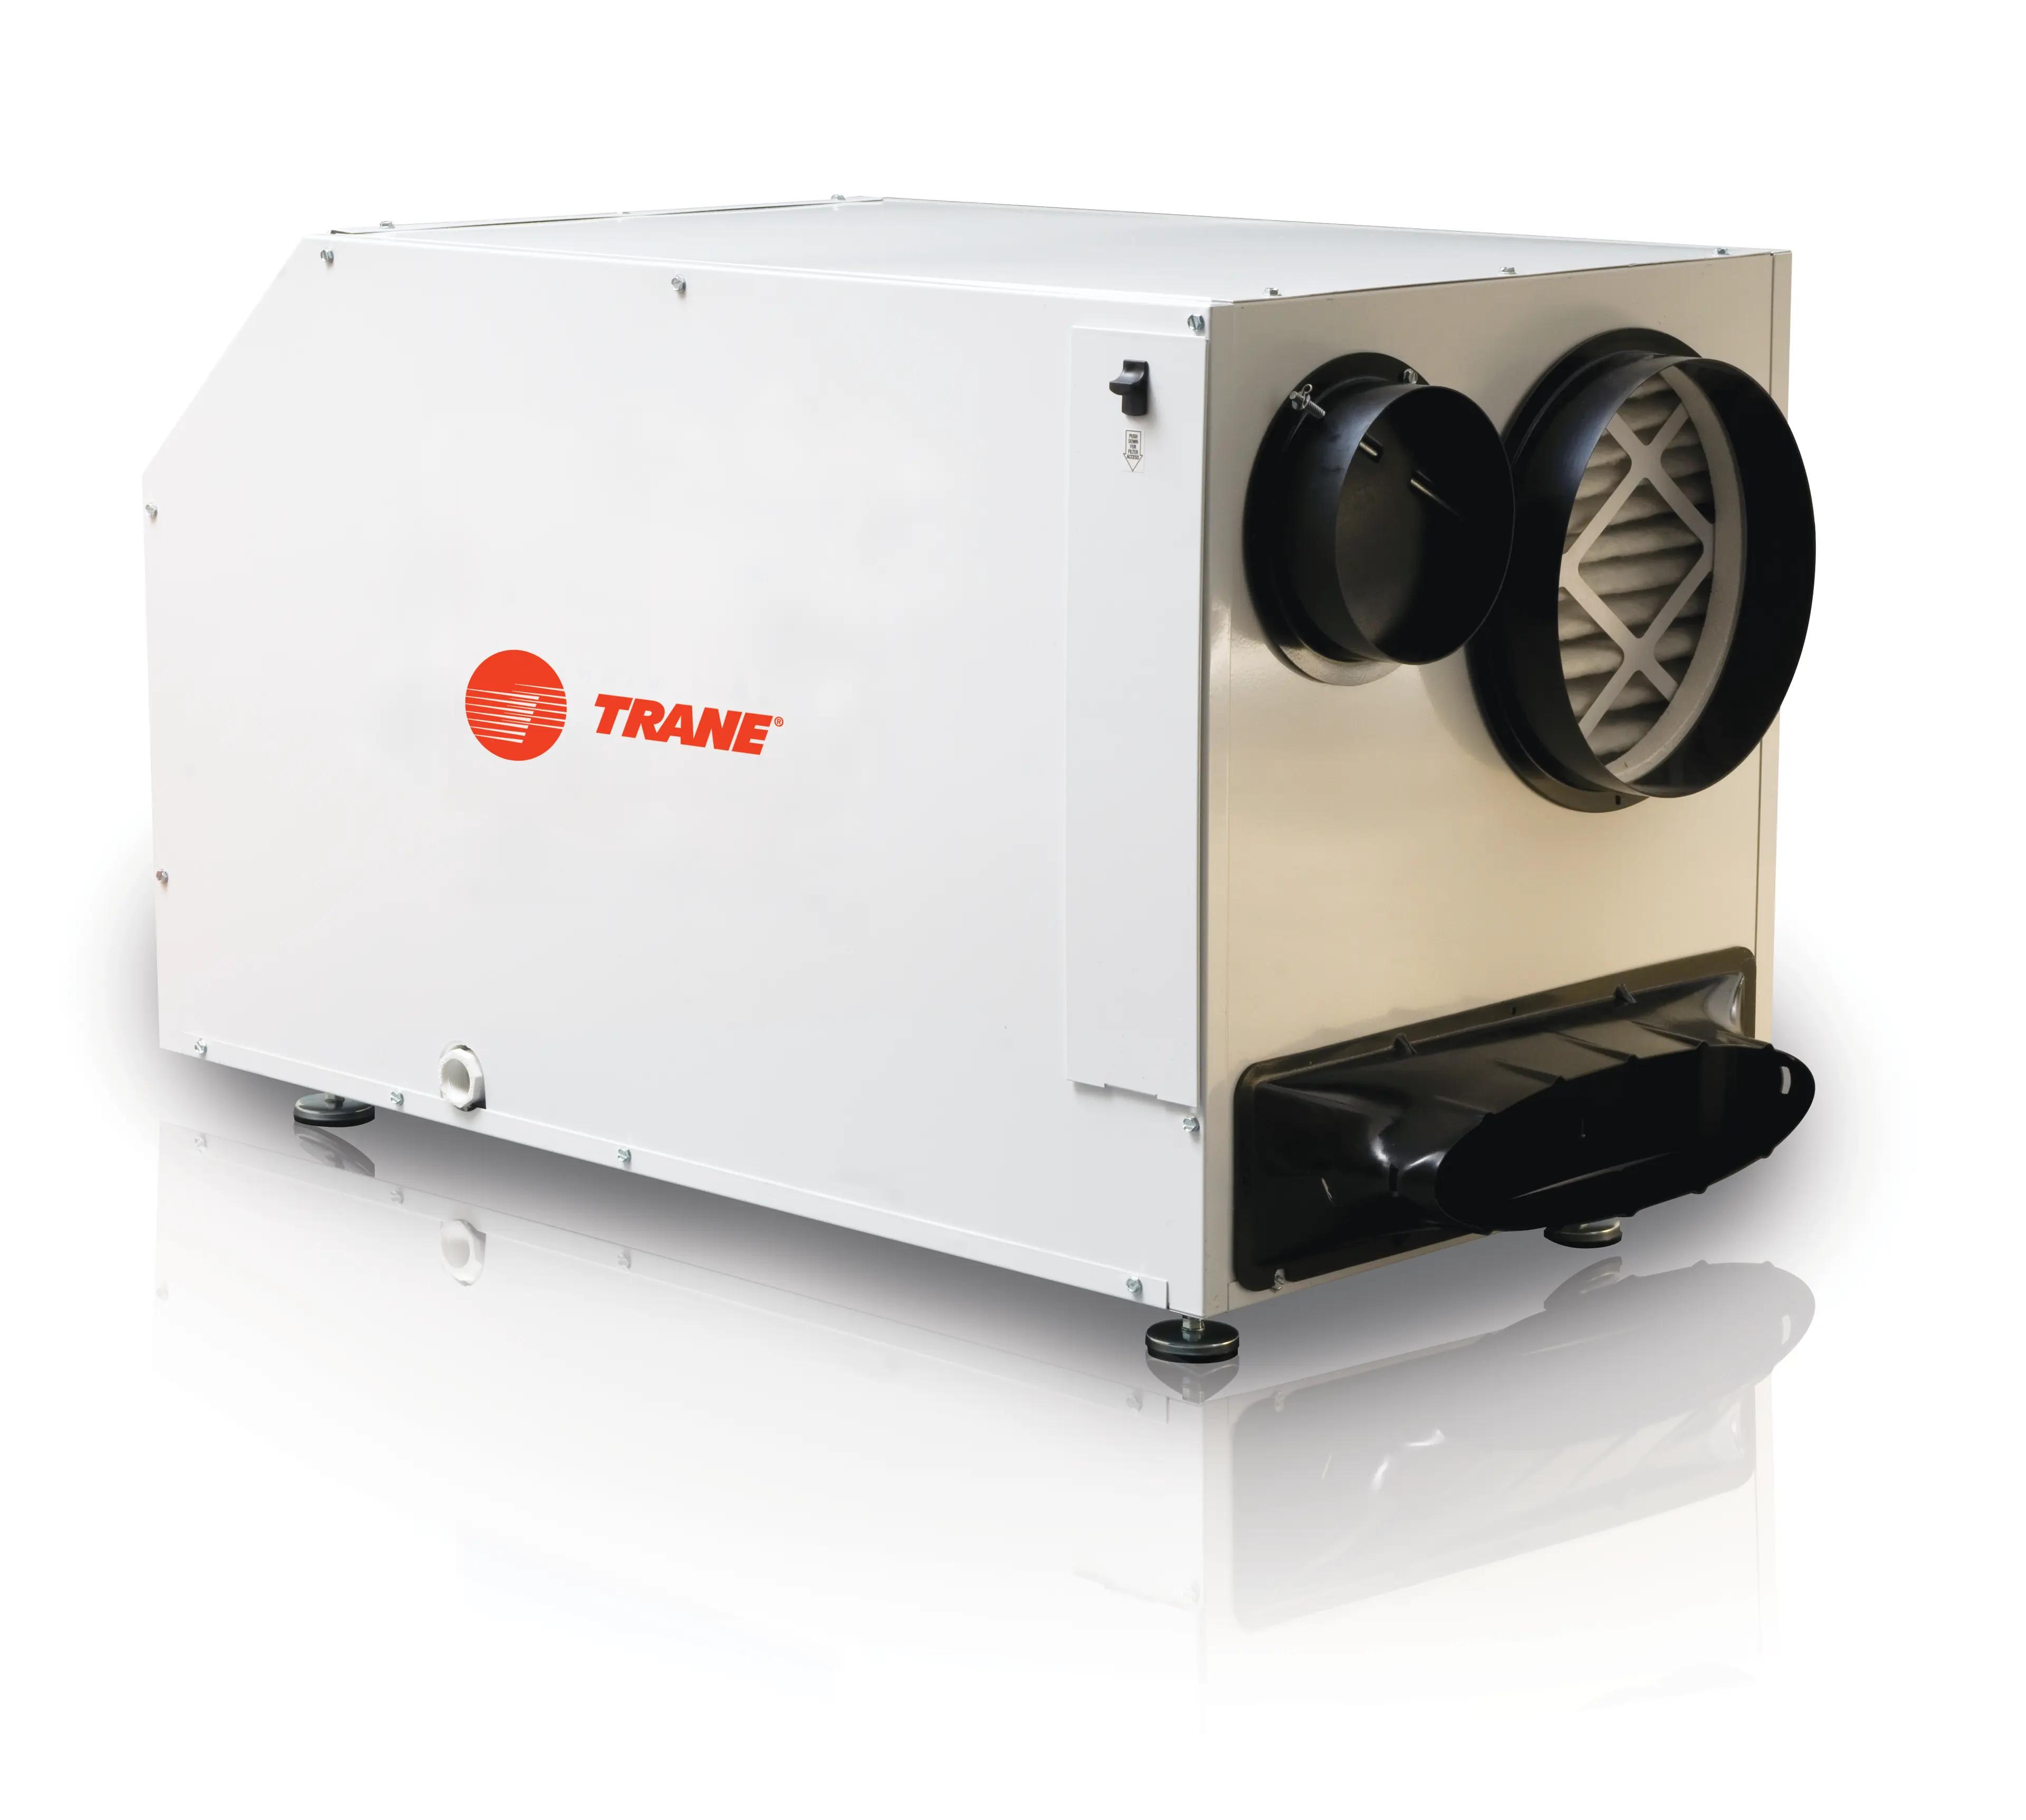 Trane Whole Home Dehumidifier with Optional Ventilation, presented by SS&B Heating & Cooling in Springfield, MO - a comprehensive solution for controlling indoor humidity and ensuring optimal air circulation.